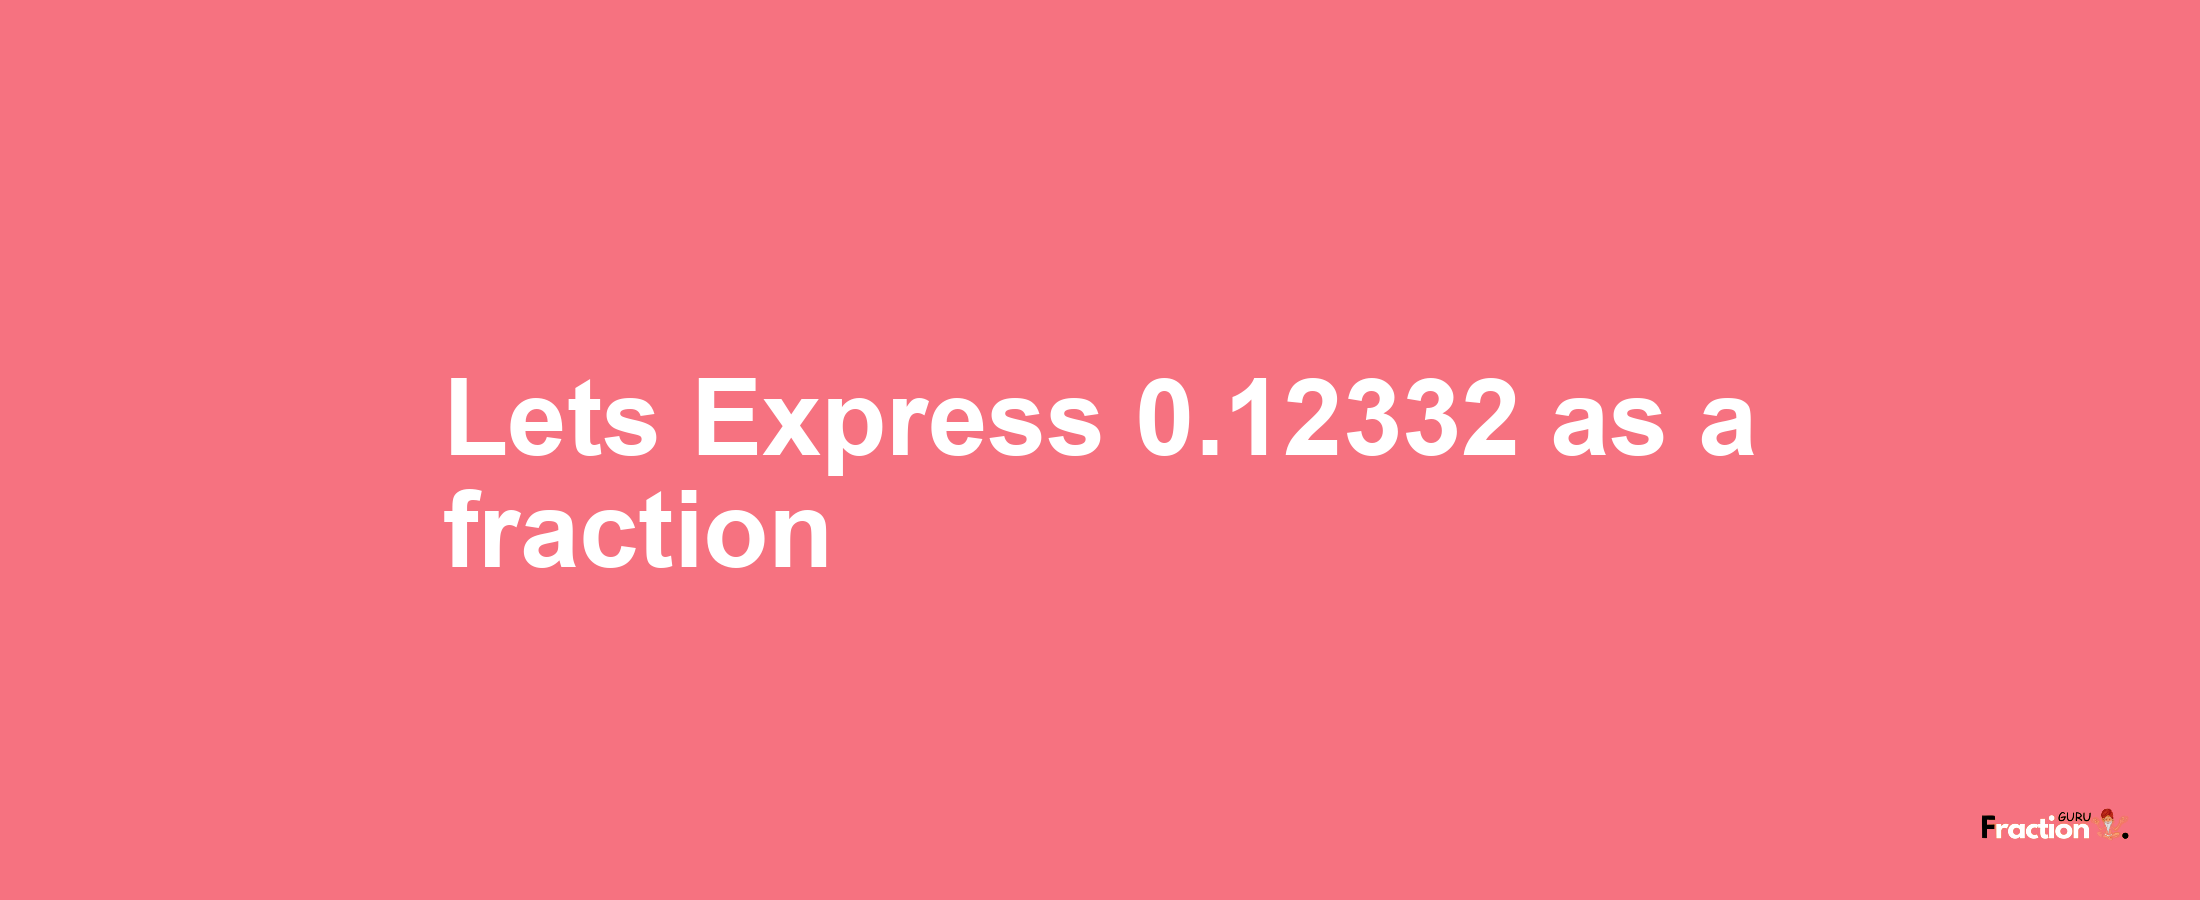 Lets Express 0.12332 as afraction